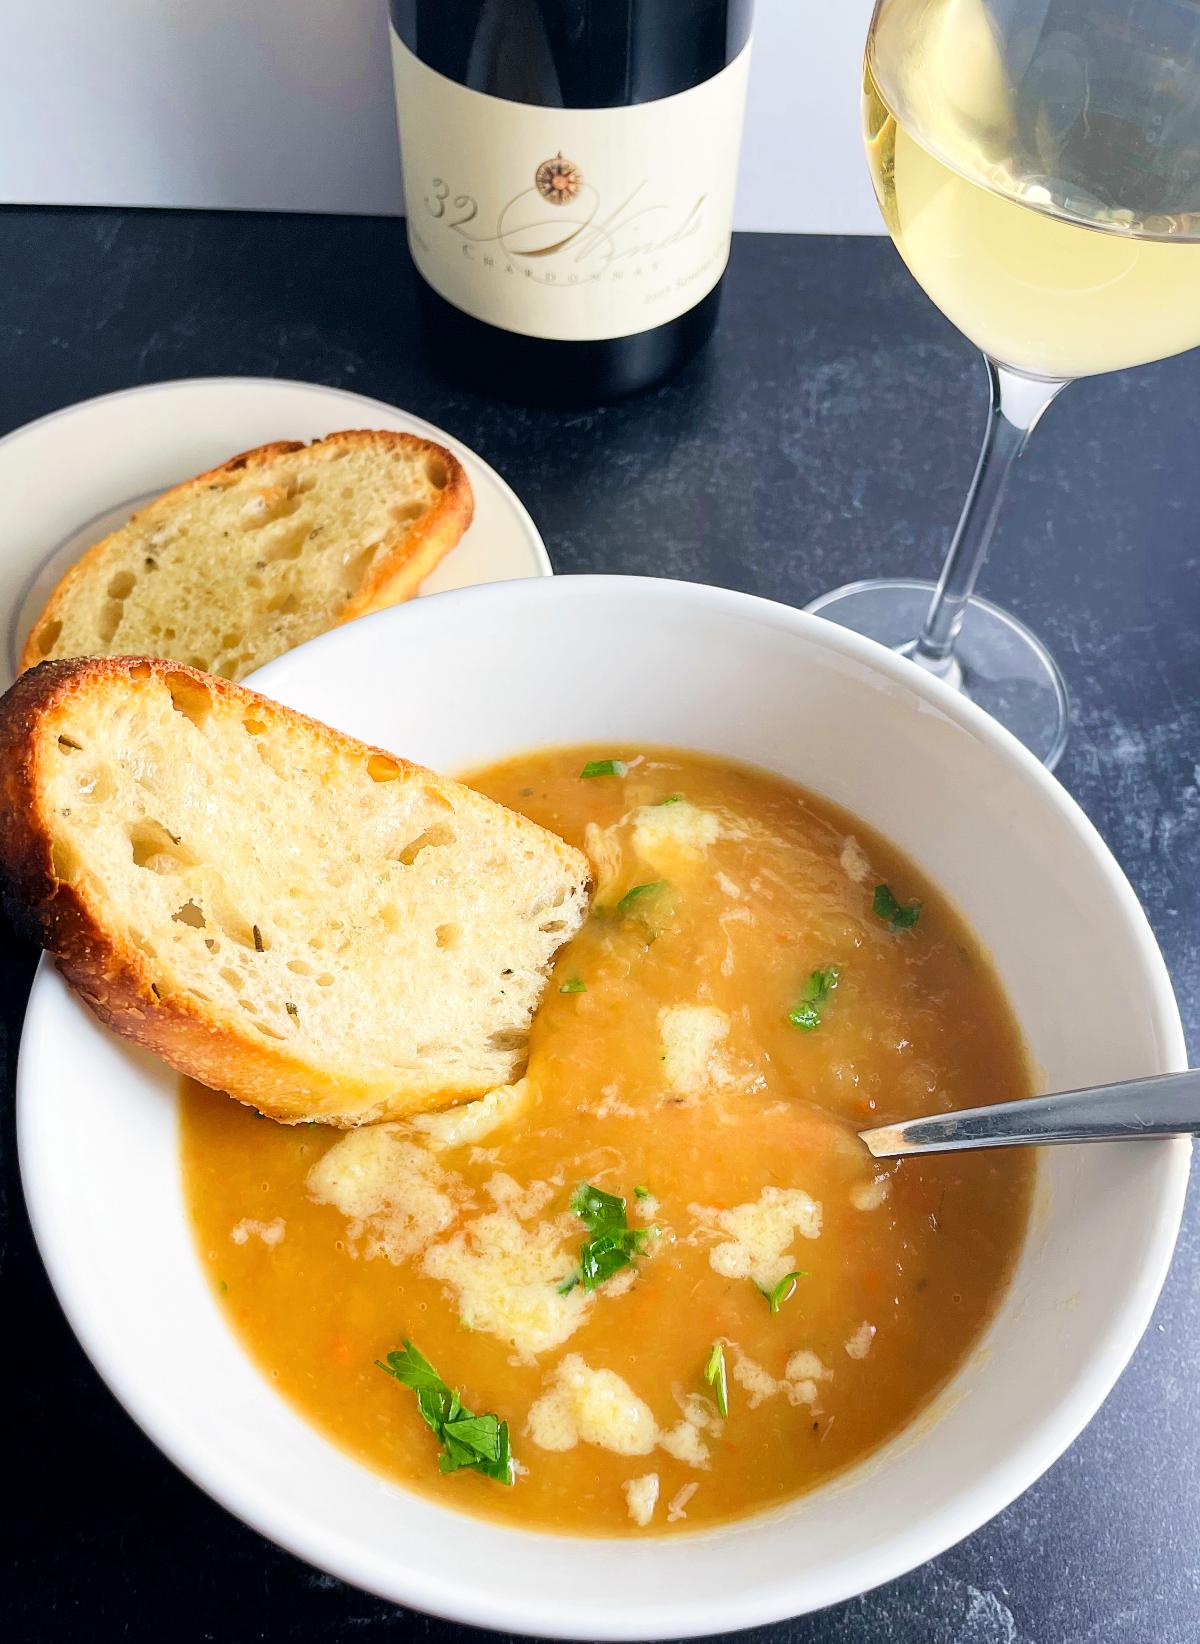 Irish vegetable soup served in a white bowl with toasted bread and a glass of Chardonnay.